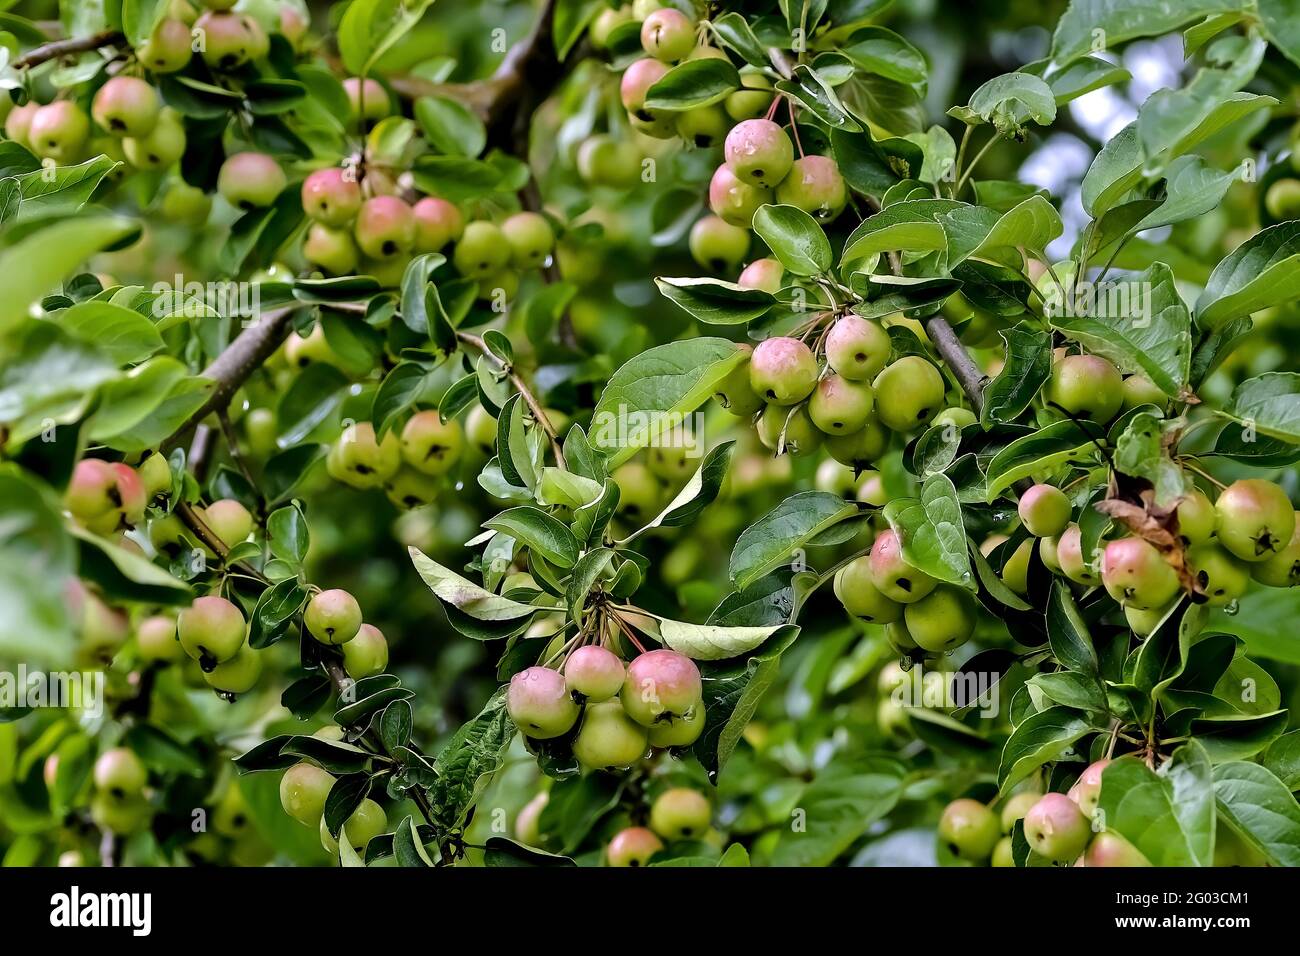 Very many red fruits of a grabapple named 'Butterball' (Malus x zumi) ripe on the branches after a rain in summer, Bavaria, Germany Stock Photo